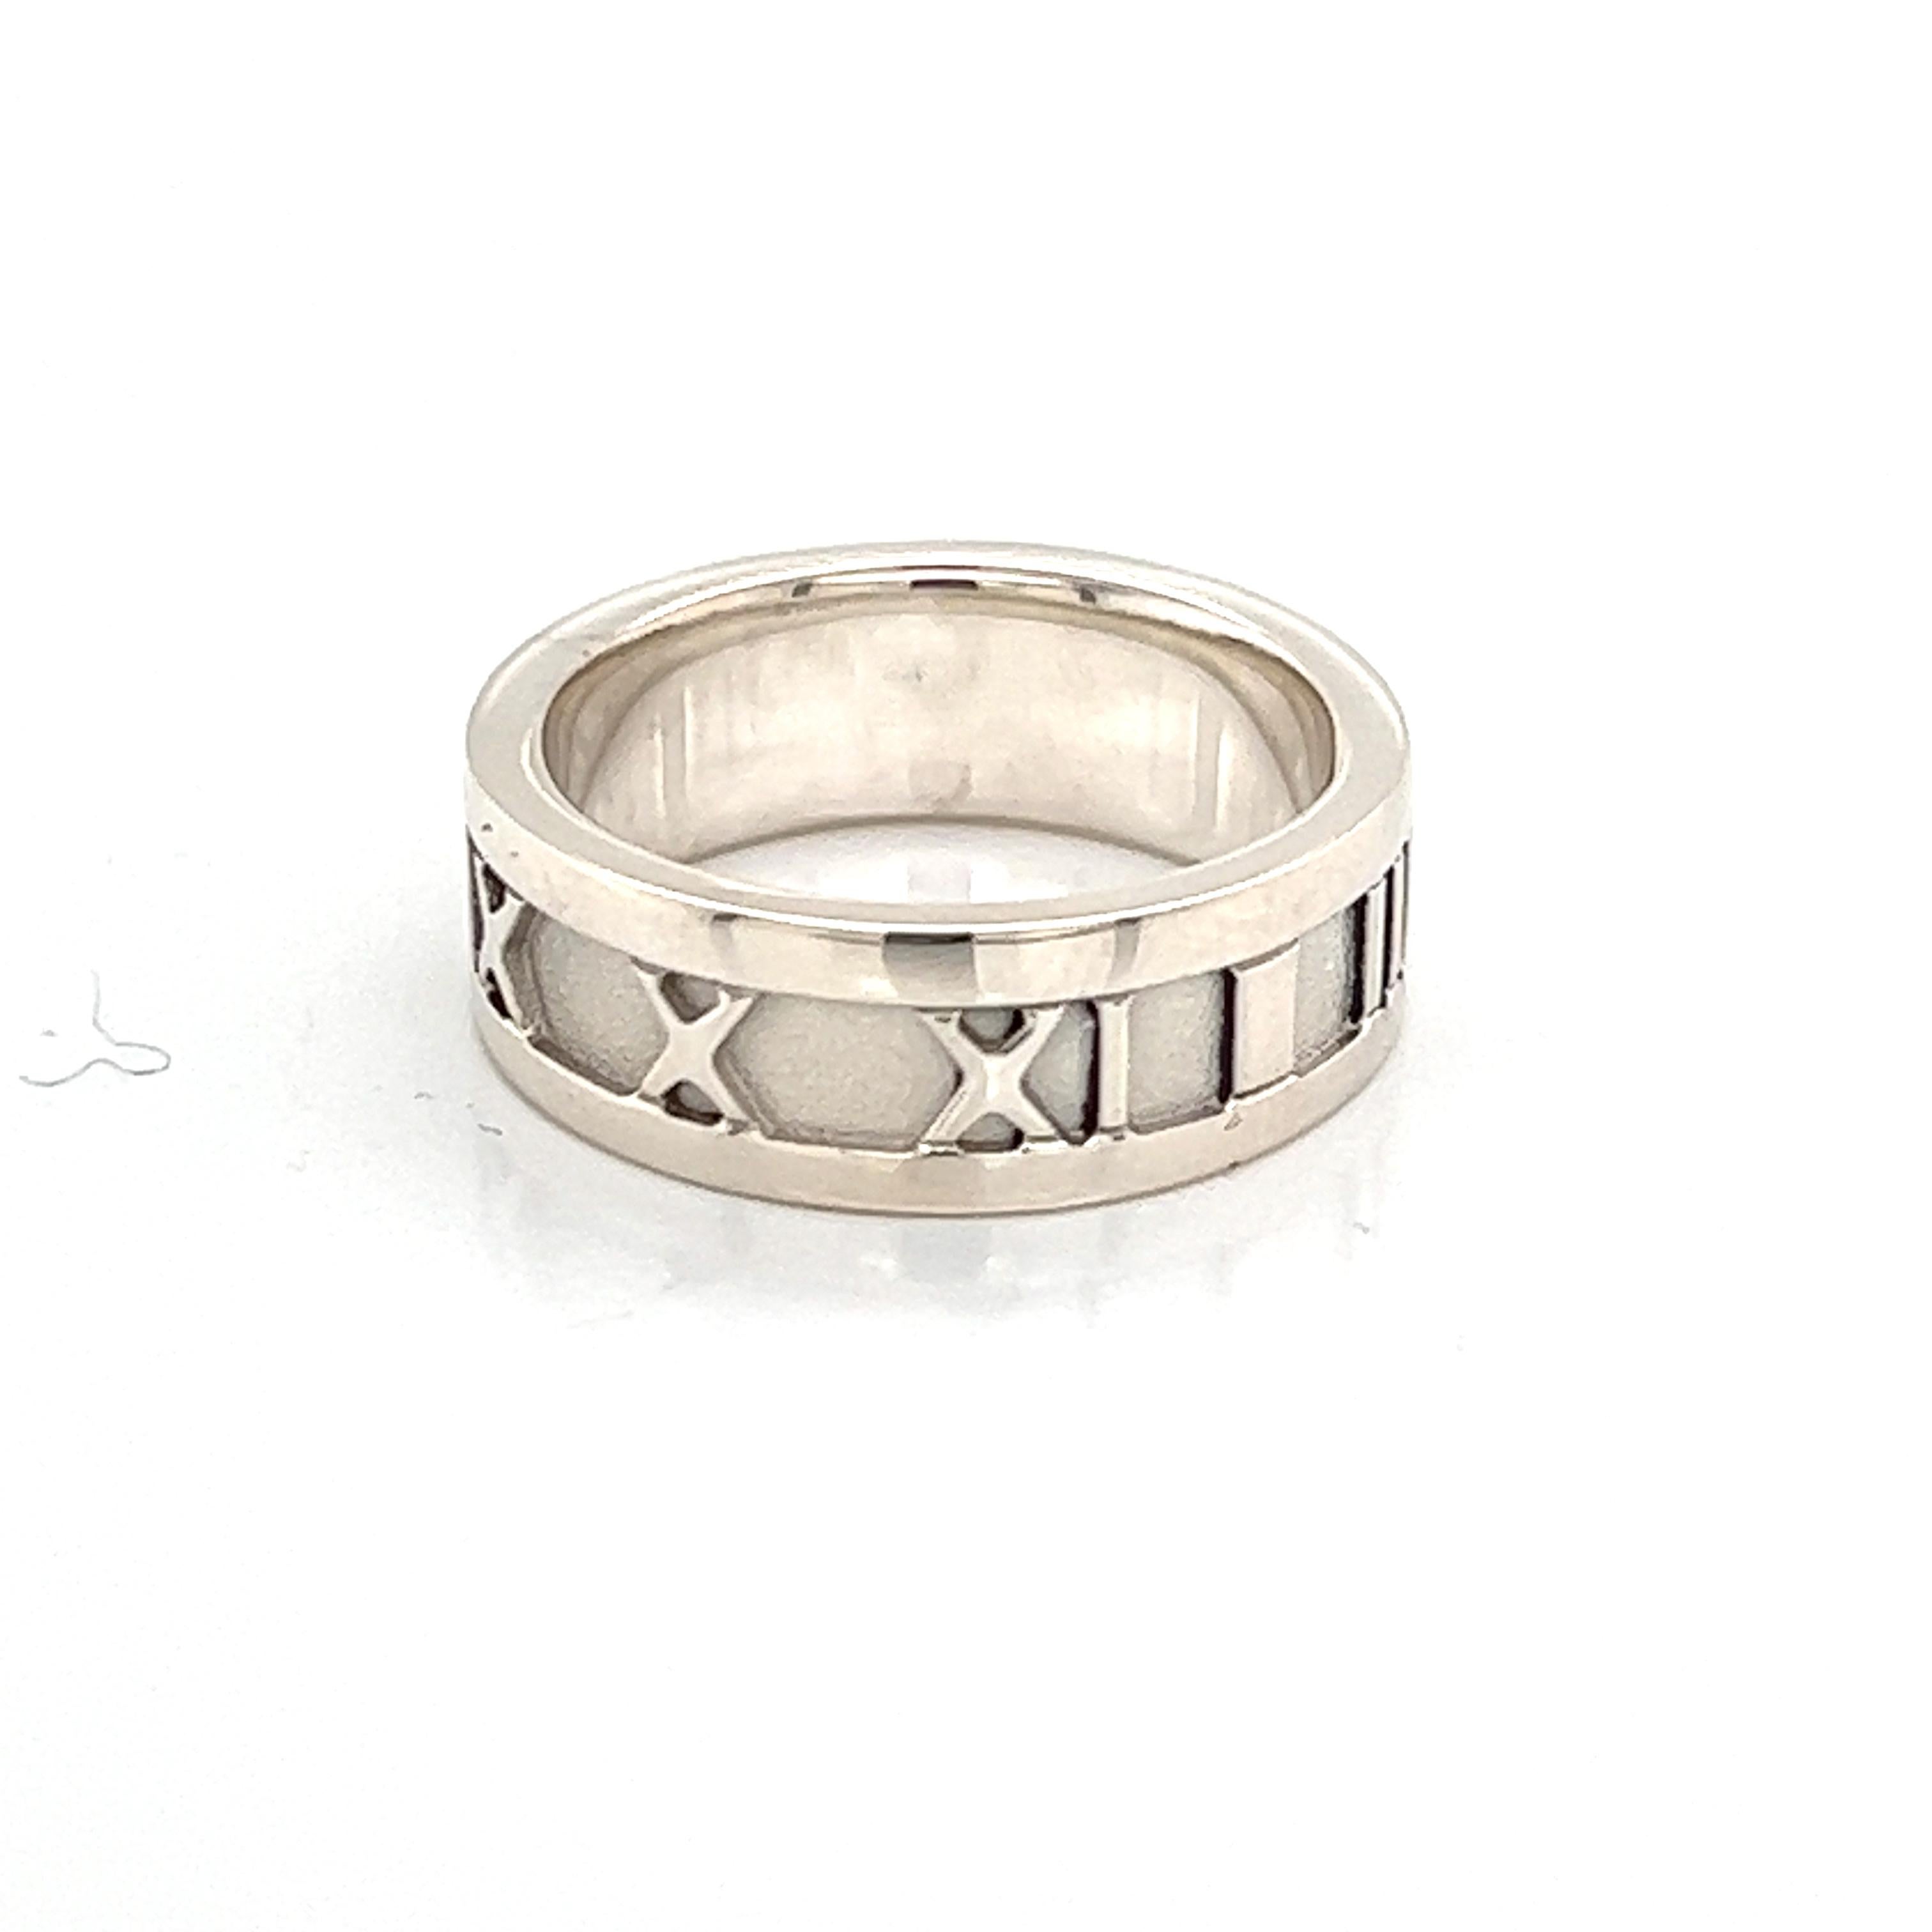 Tiffany & Co. Estate Sterling Silver Ring, 5.2 Grams For Sale 4